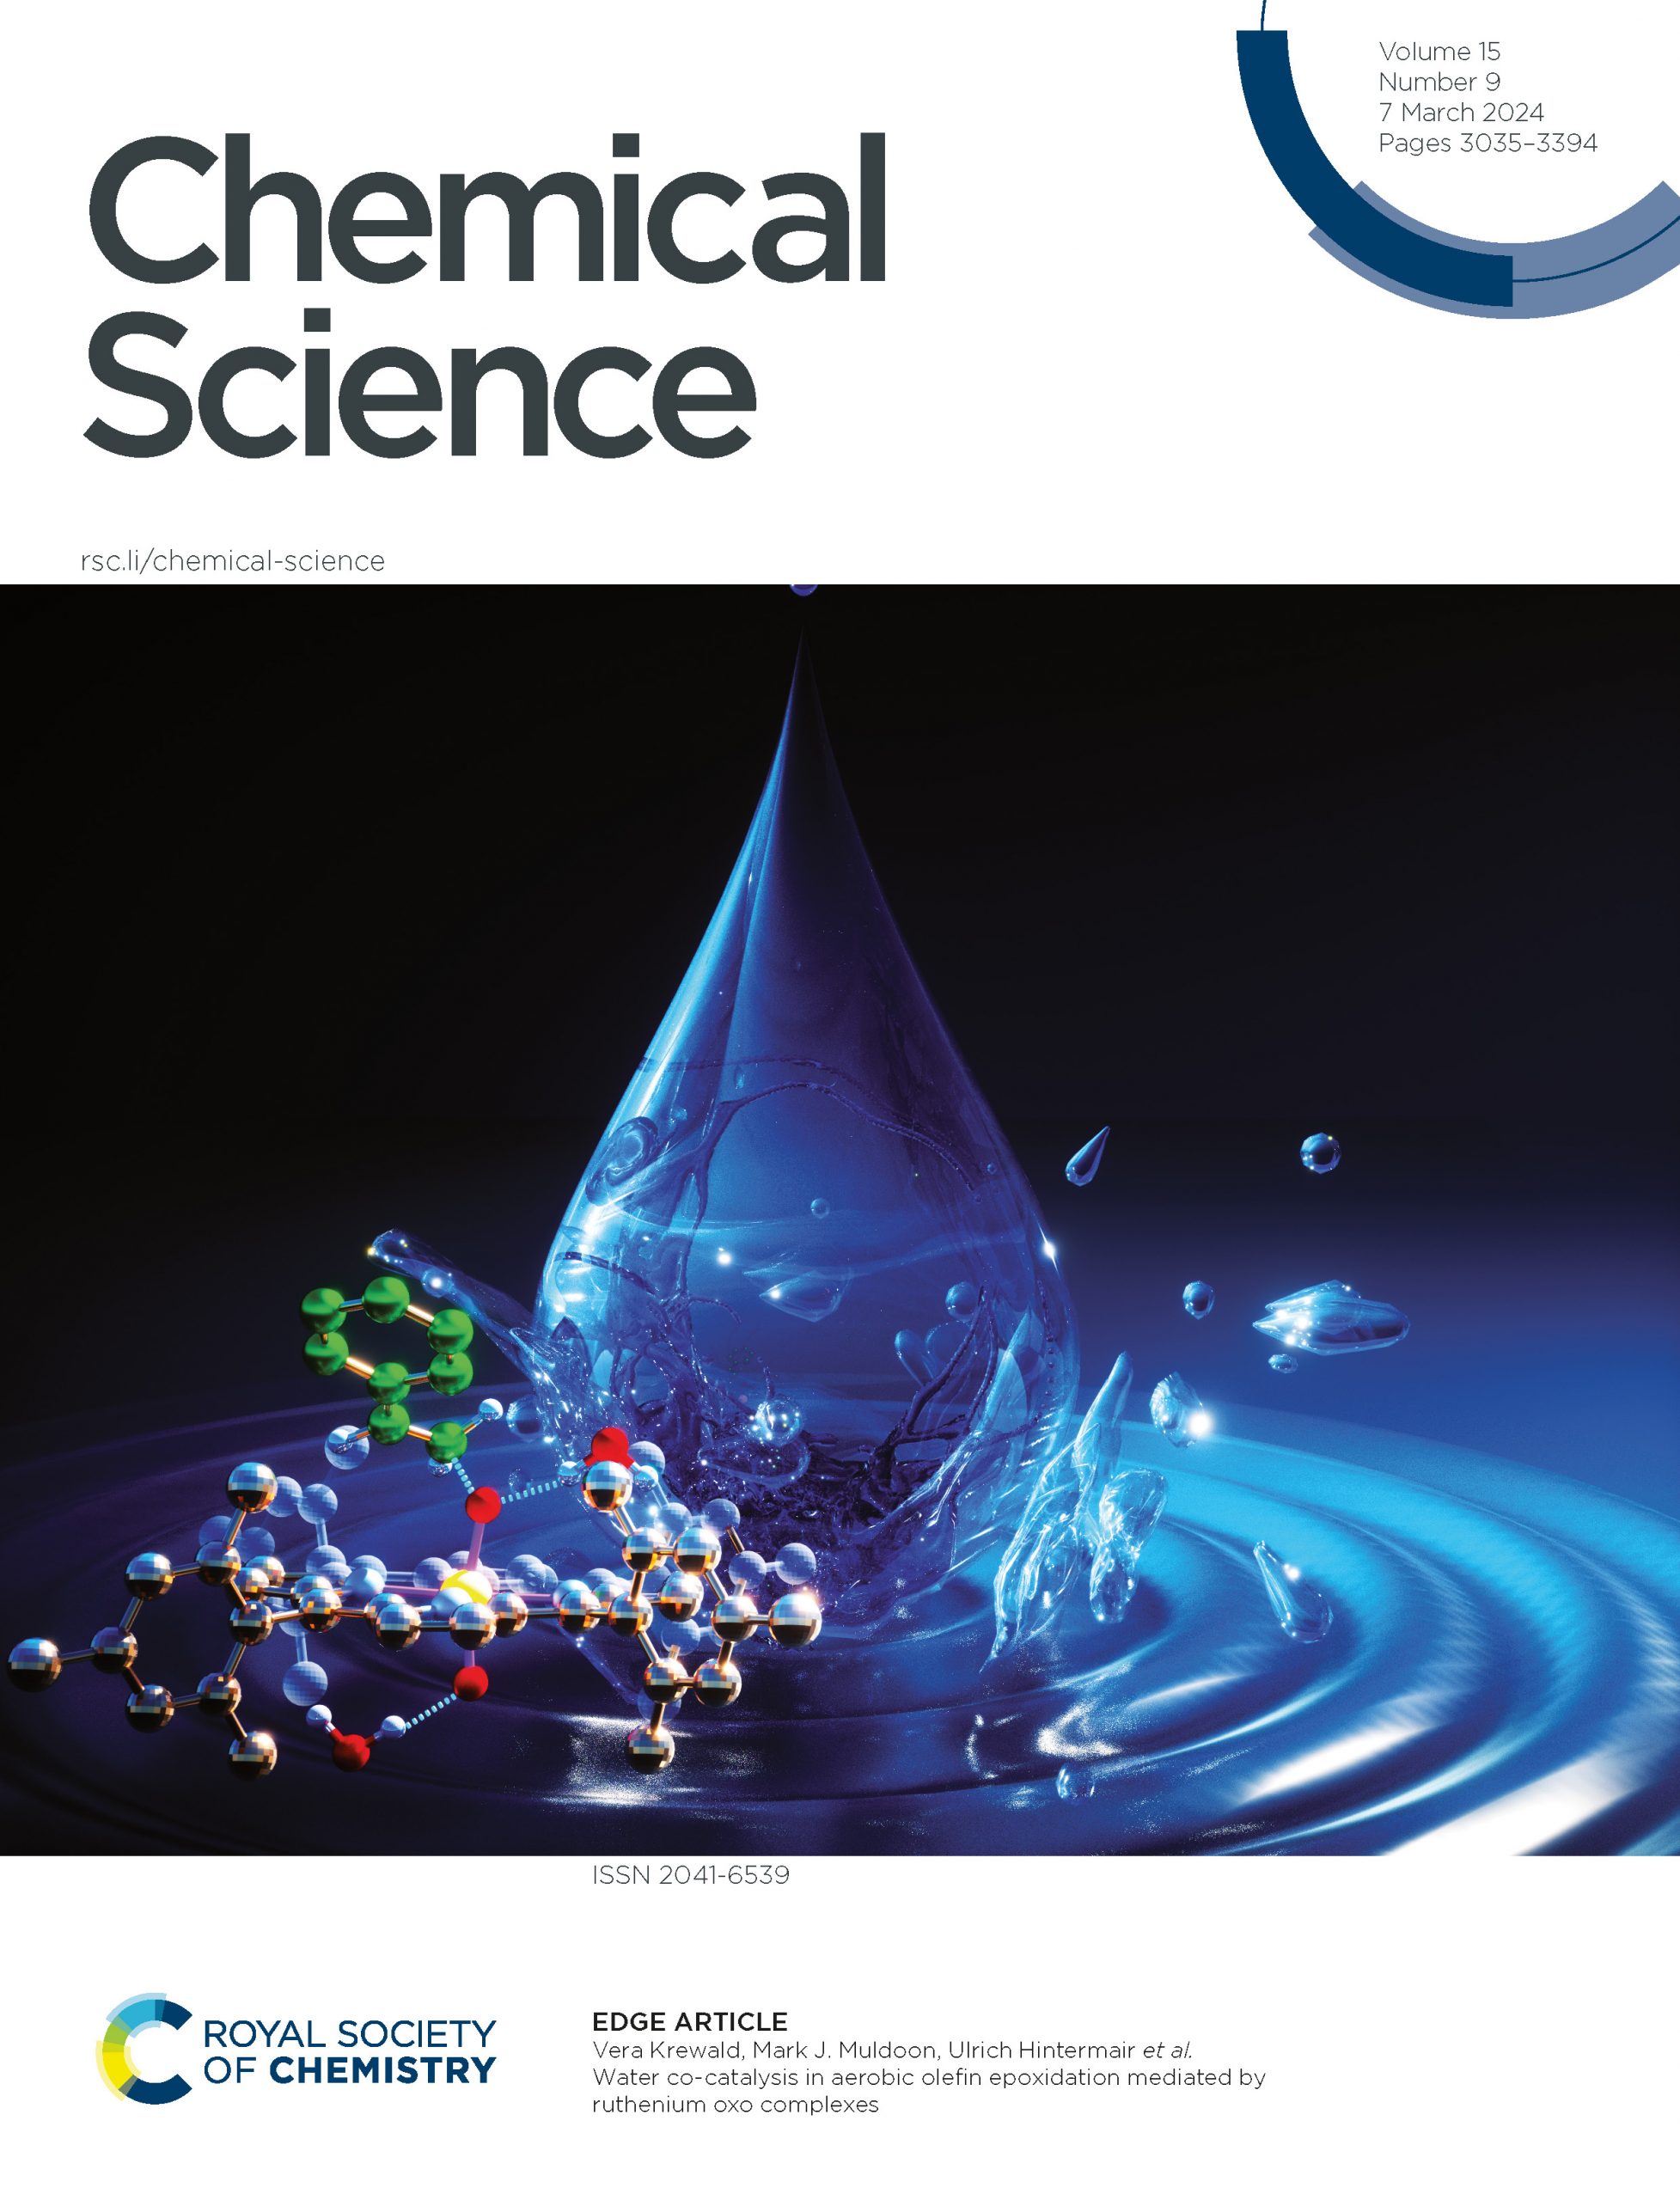 Water co-catalysis in aerobic olefin epoxidation mediated by ruthenium oxo complexes